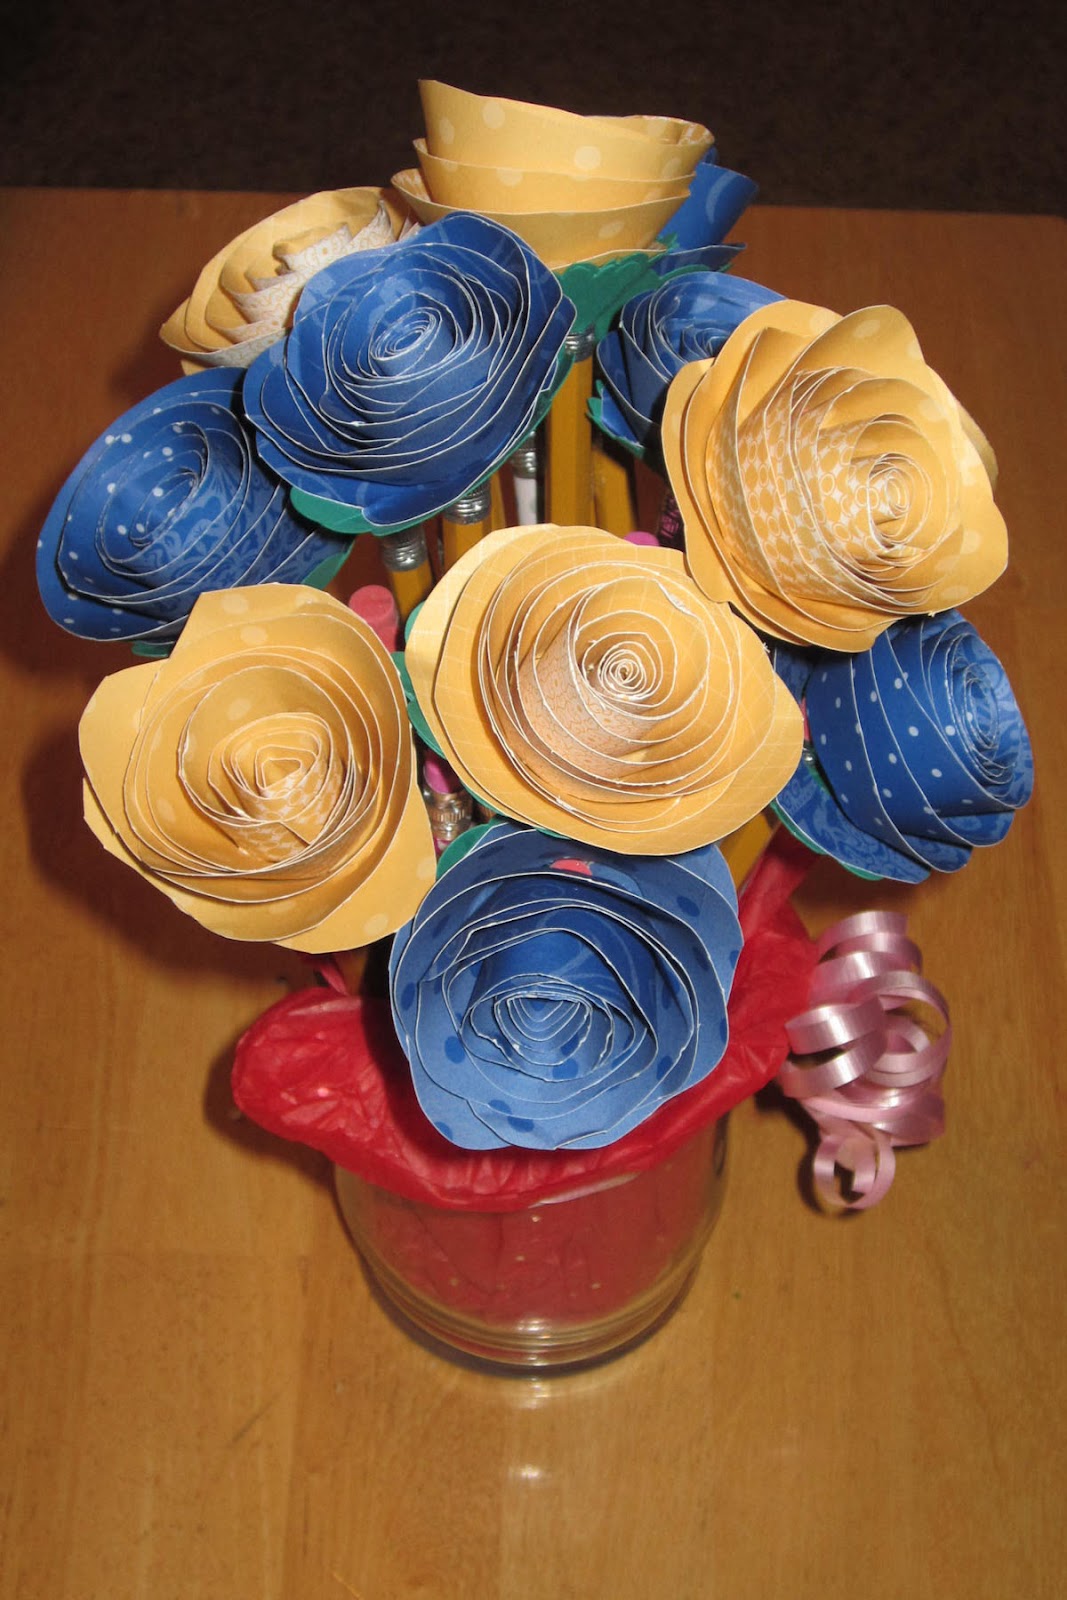 Rolled Roses for the Teacher | Midnight Crafting